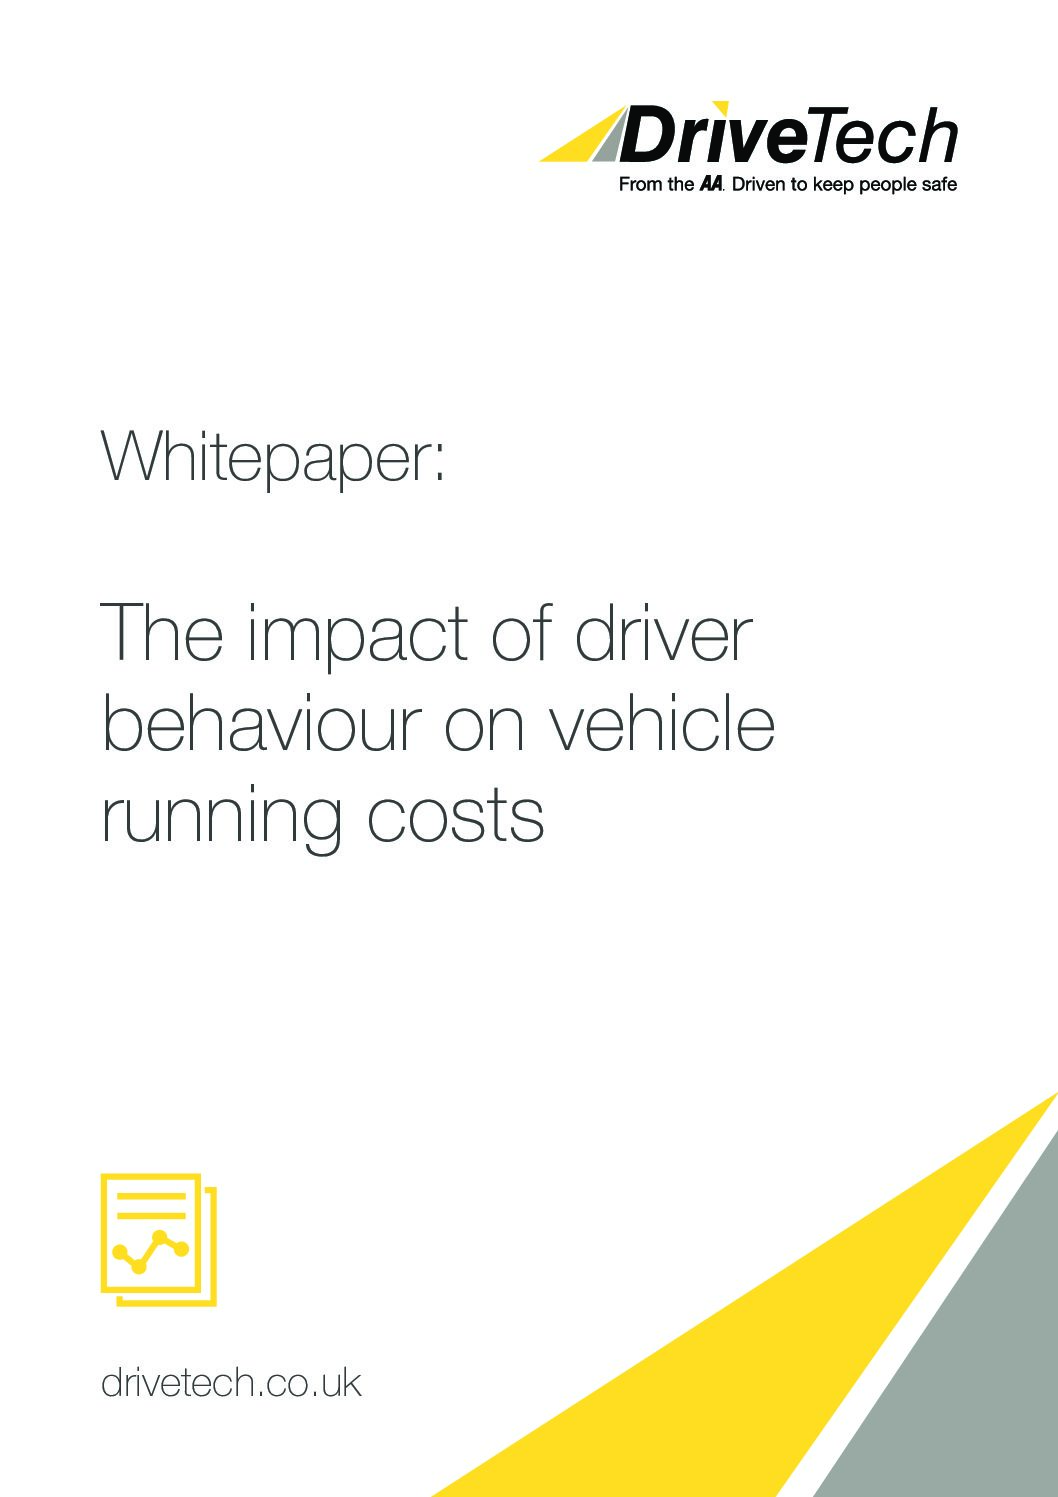 Whitepaper – The Impact Of Driver Behaviour On Vehicle Running Costs